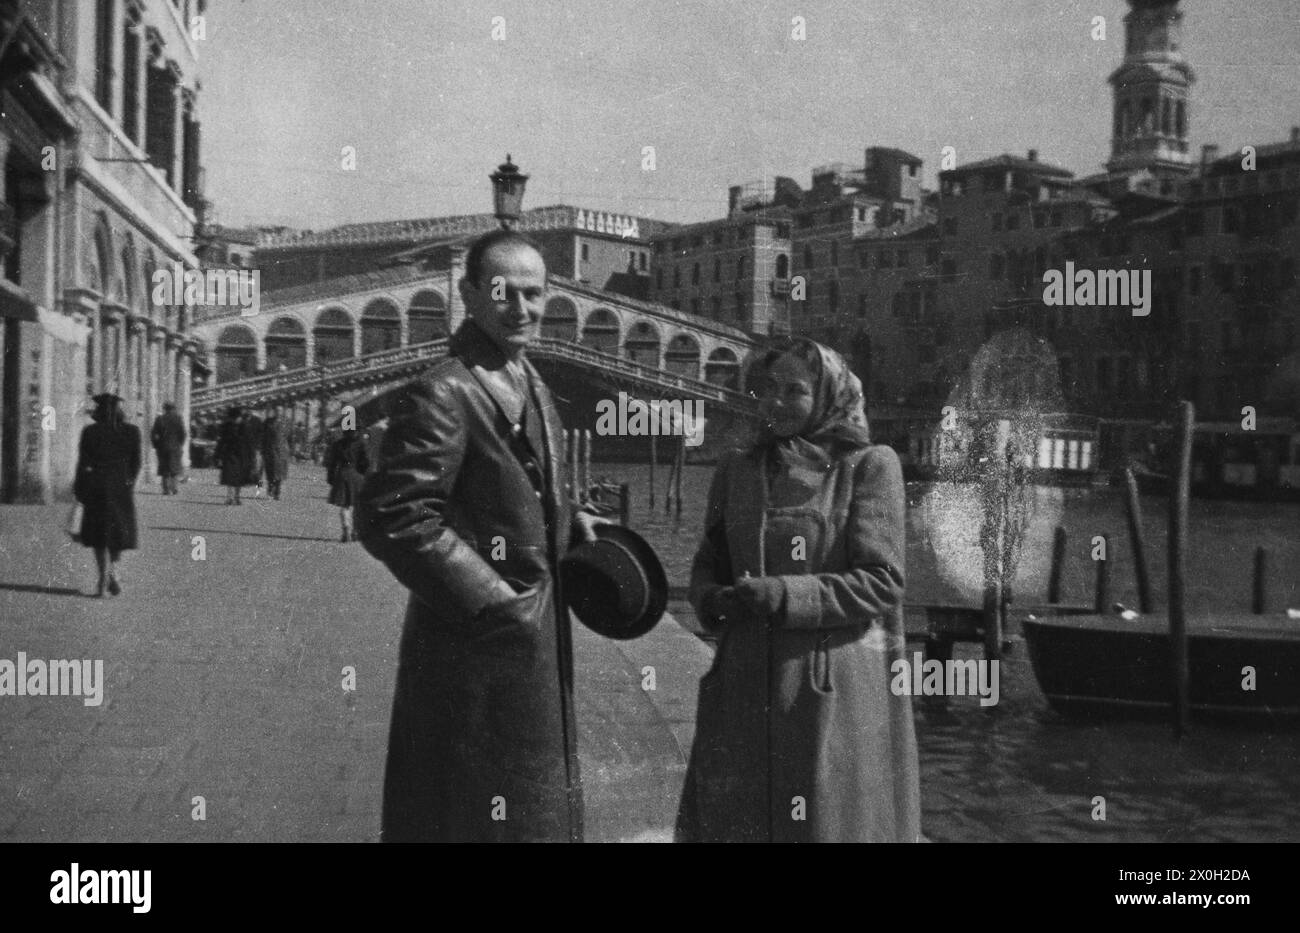 A couple, the woman with a headscarf and the man with hat, in front of the Rialto Bridge in Venice (undated picture). Stock Photo